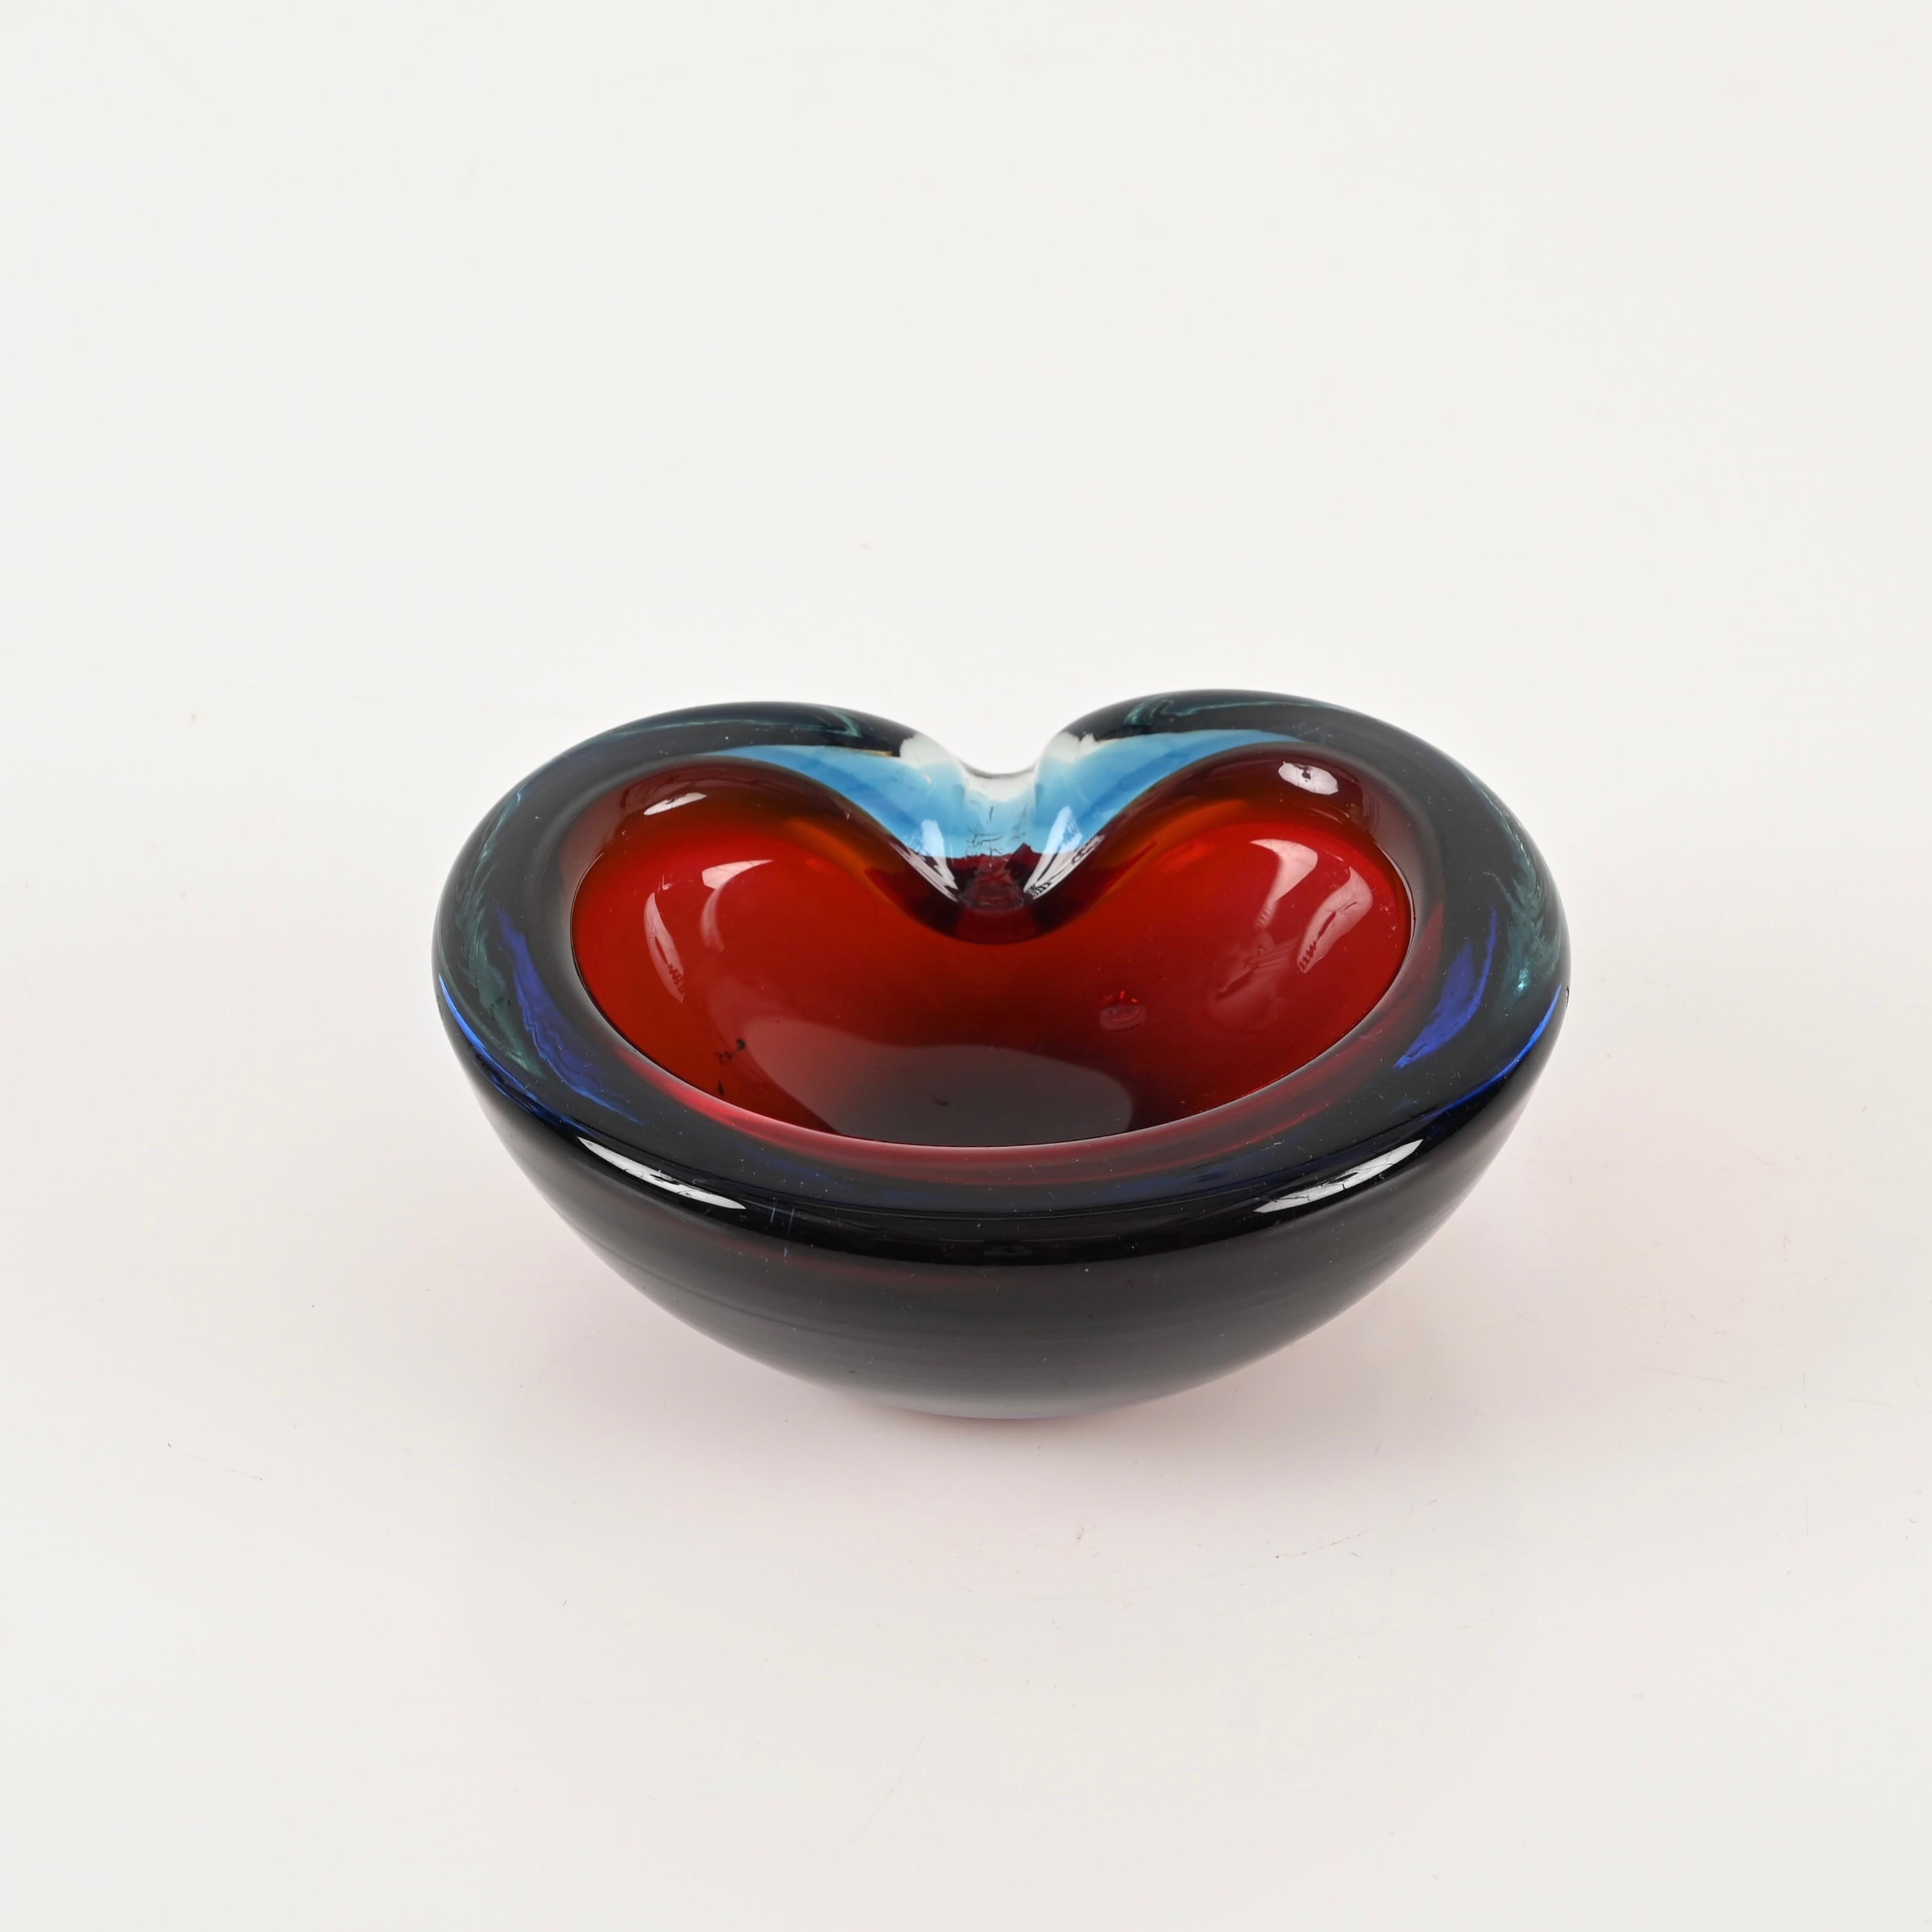 Magnificent heart-shaped, glass bowl or ashtray in a lovely Blu and Red crystal 